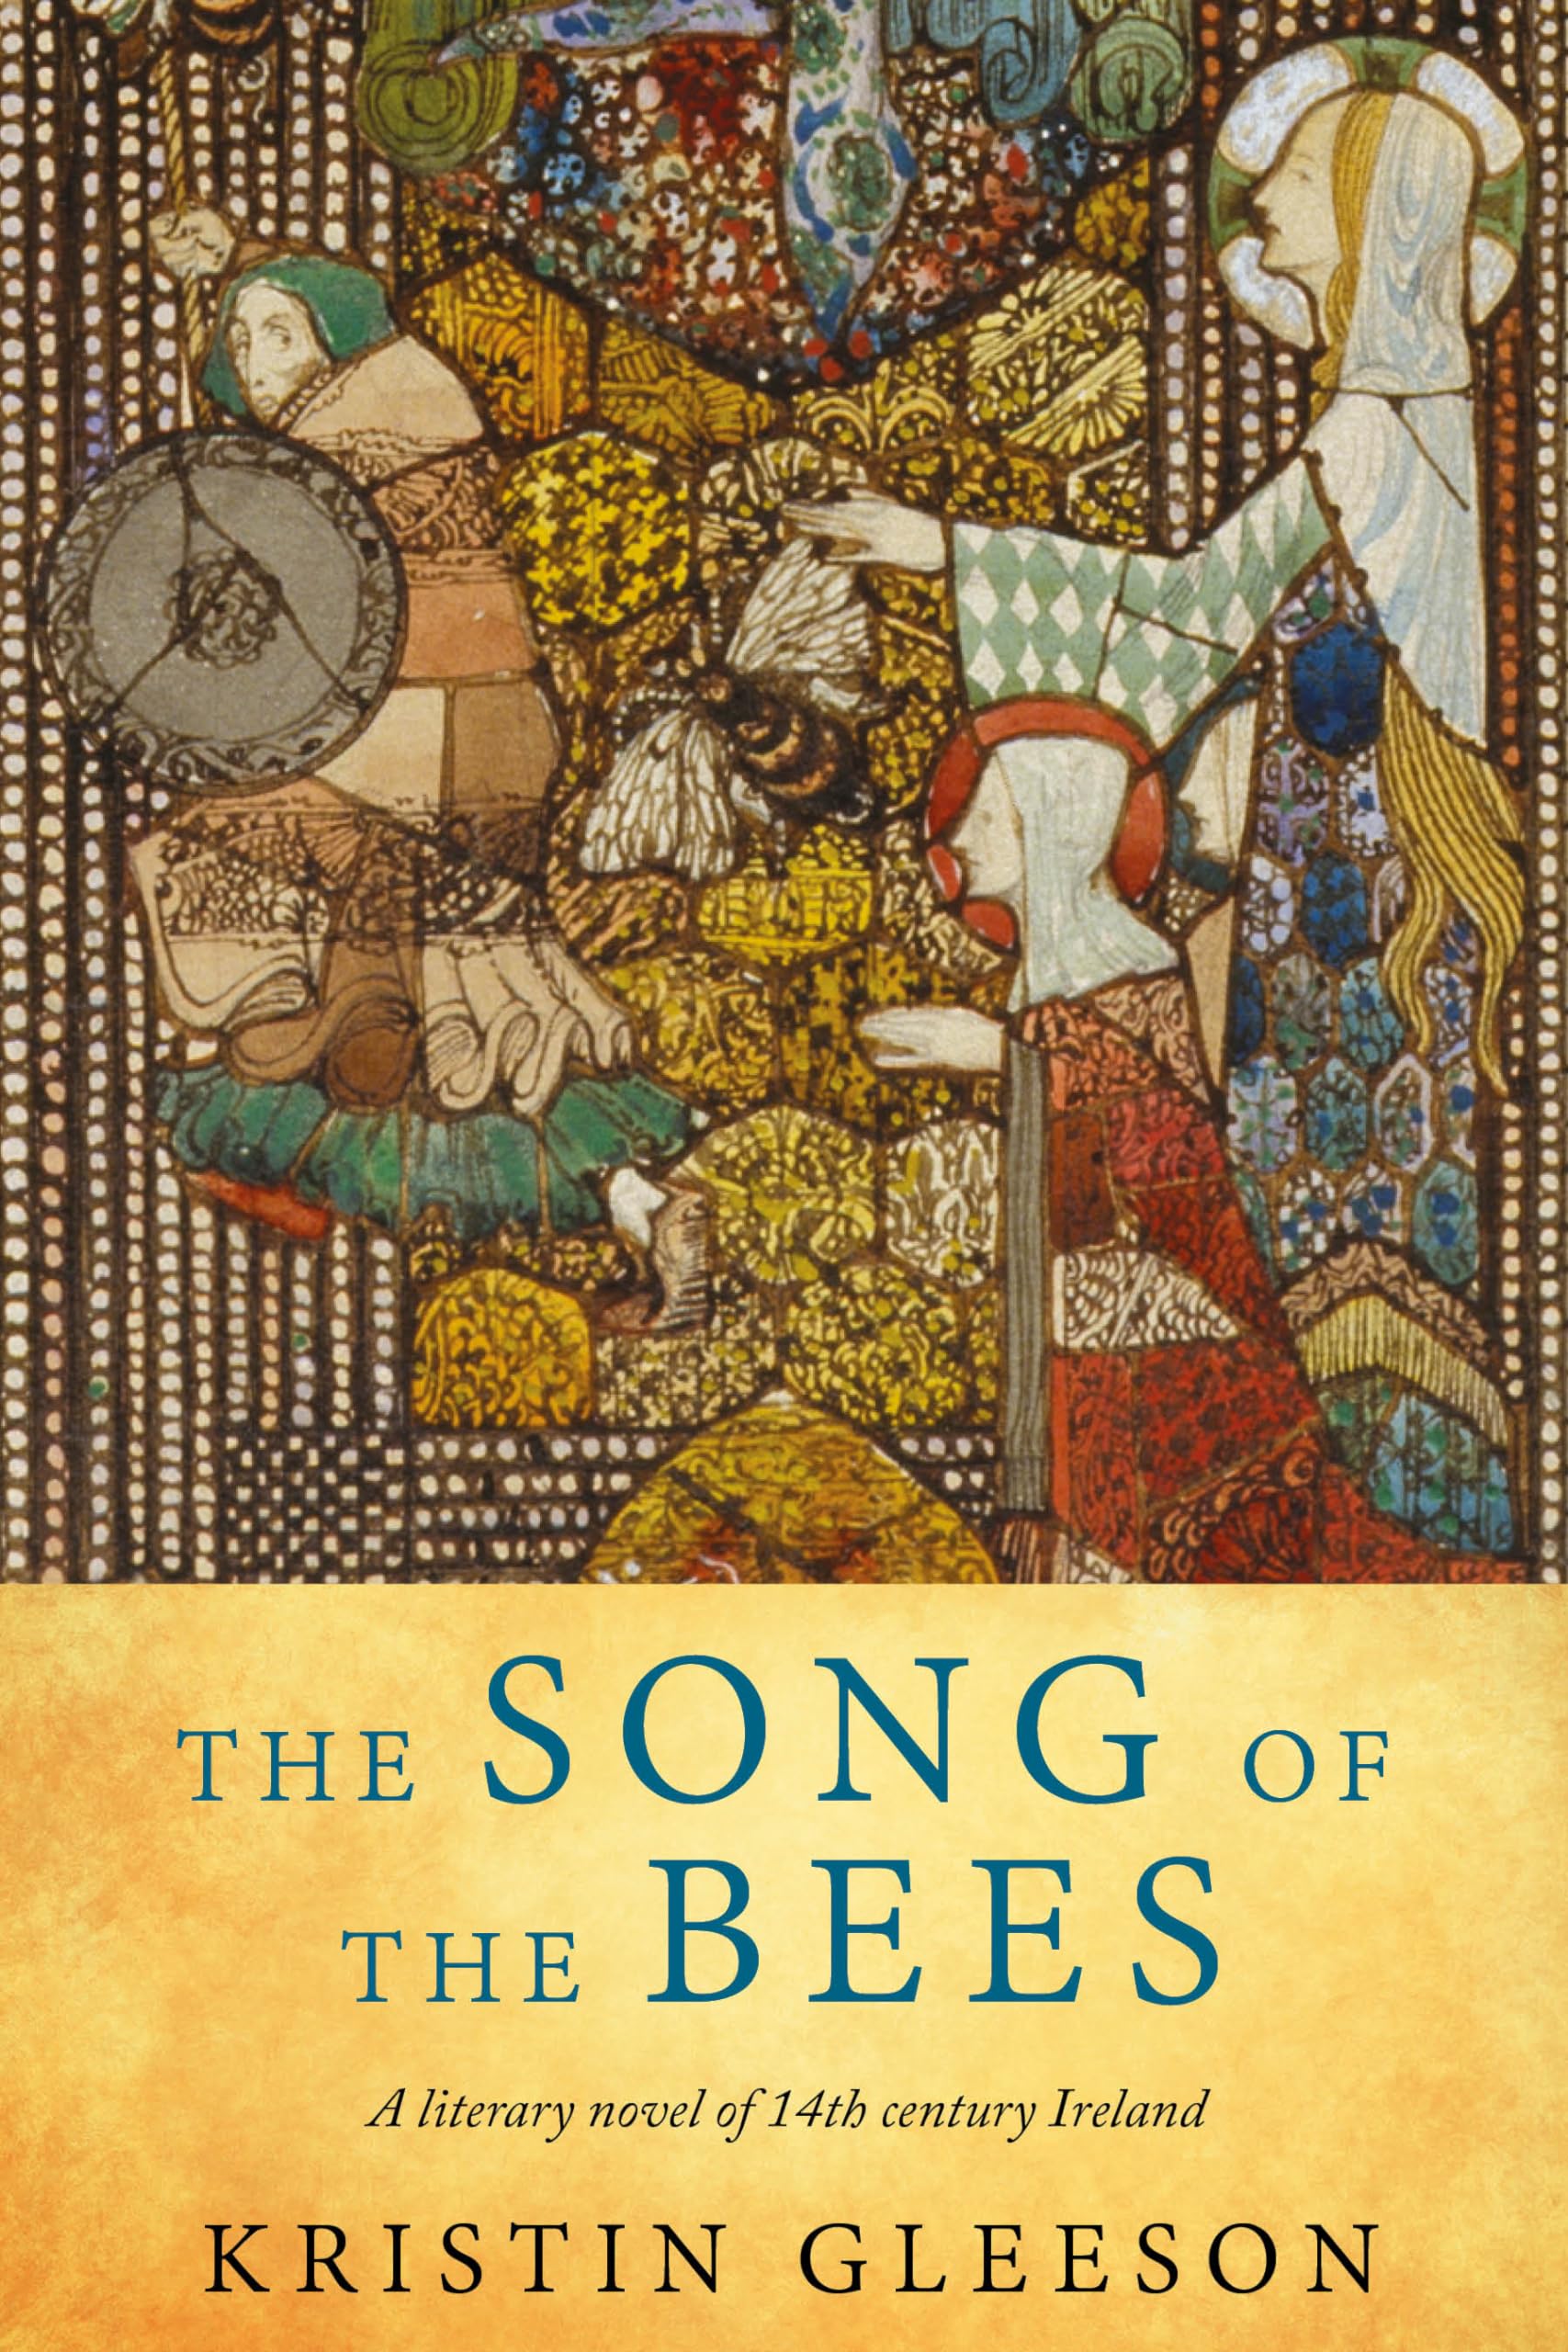 Song of the Bees: A literary historical novel of Medieval Ireland (Women of Ireland Book 2)